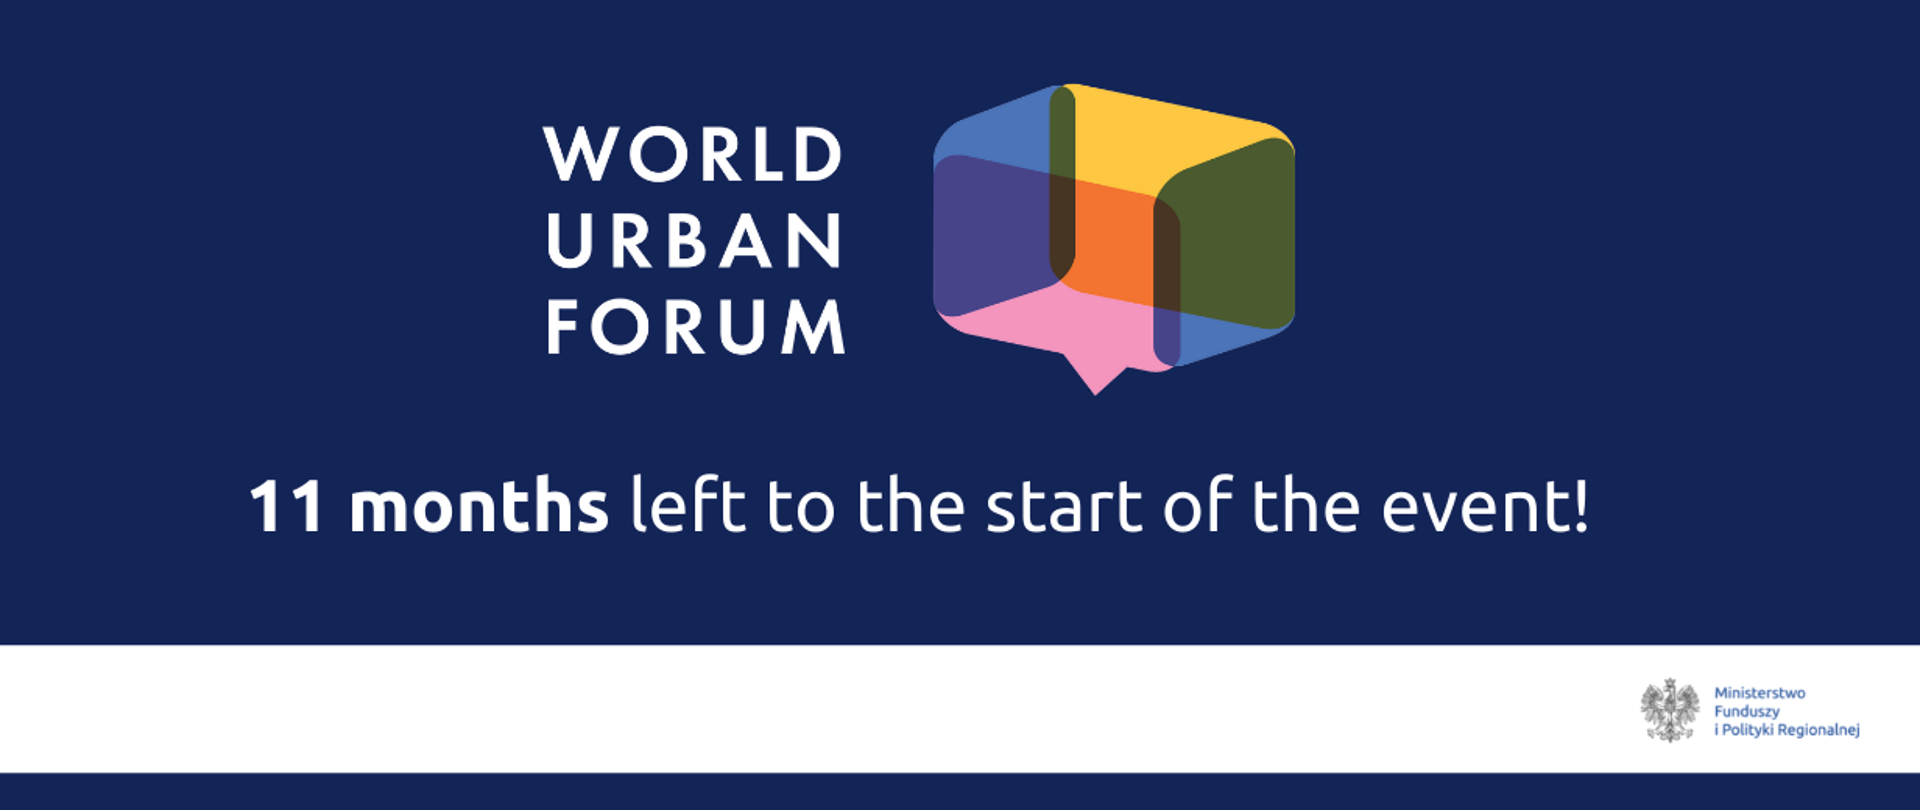 World Urban Forum in Katowice - 11 months left to the start of the event